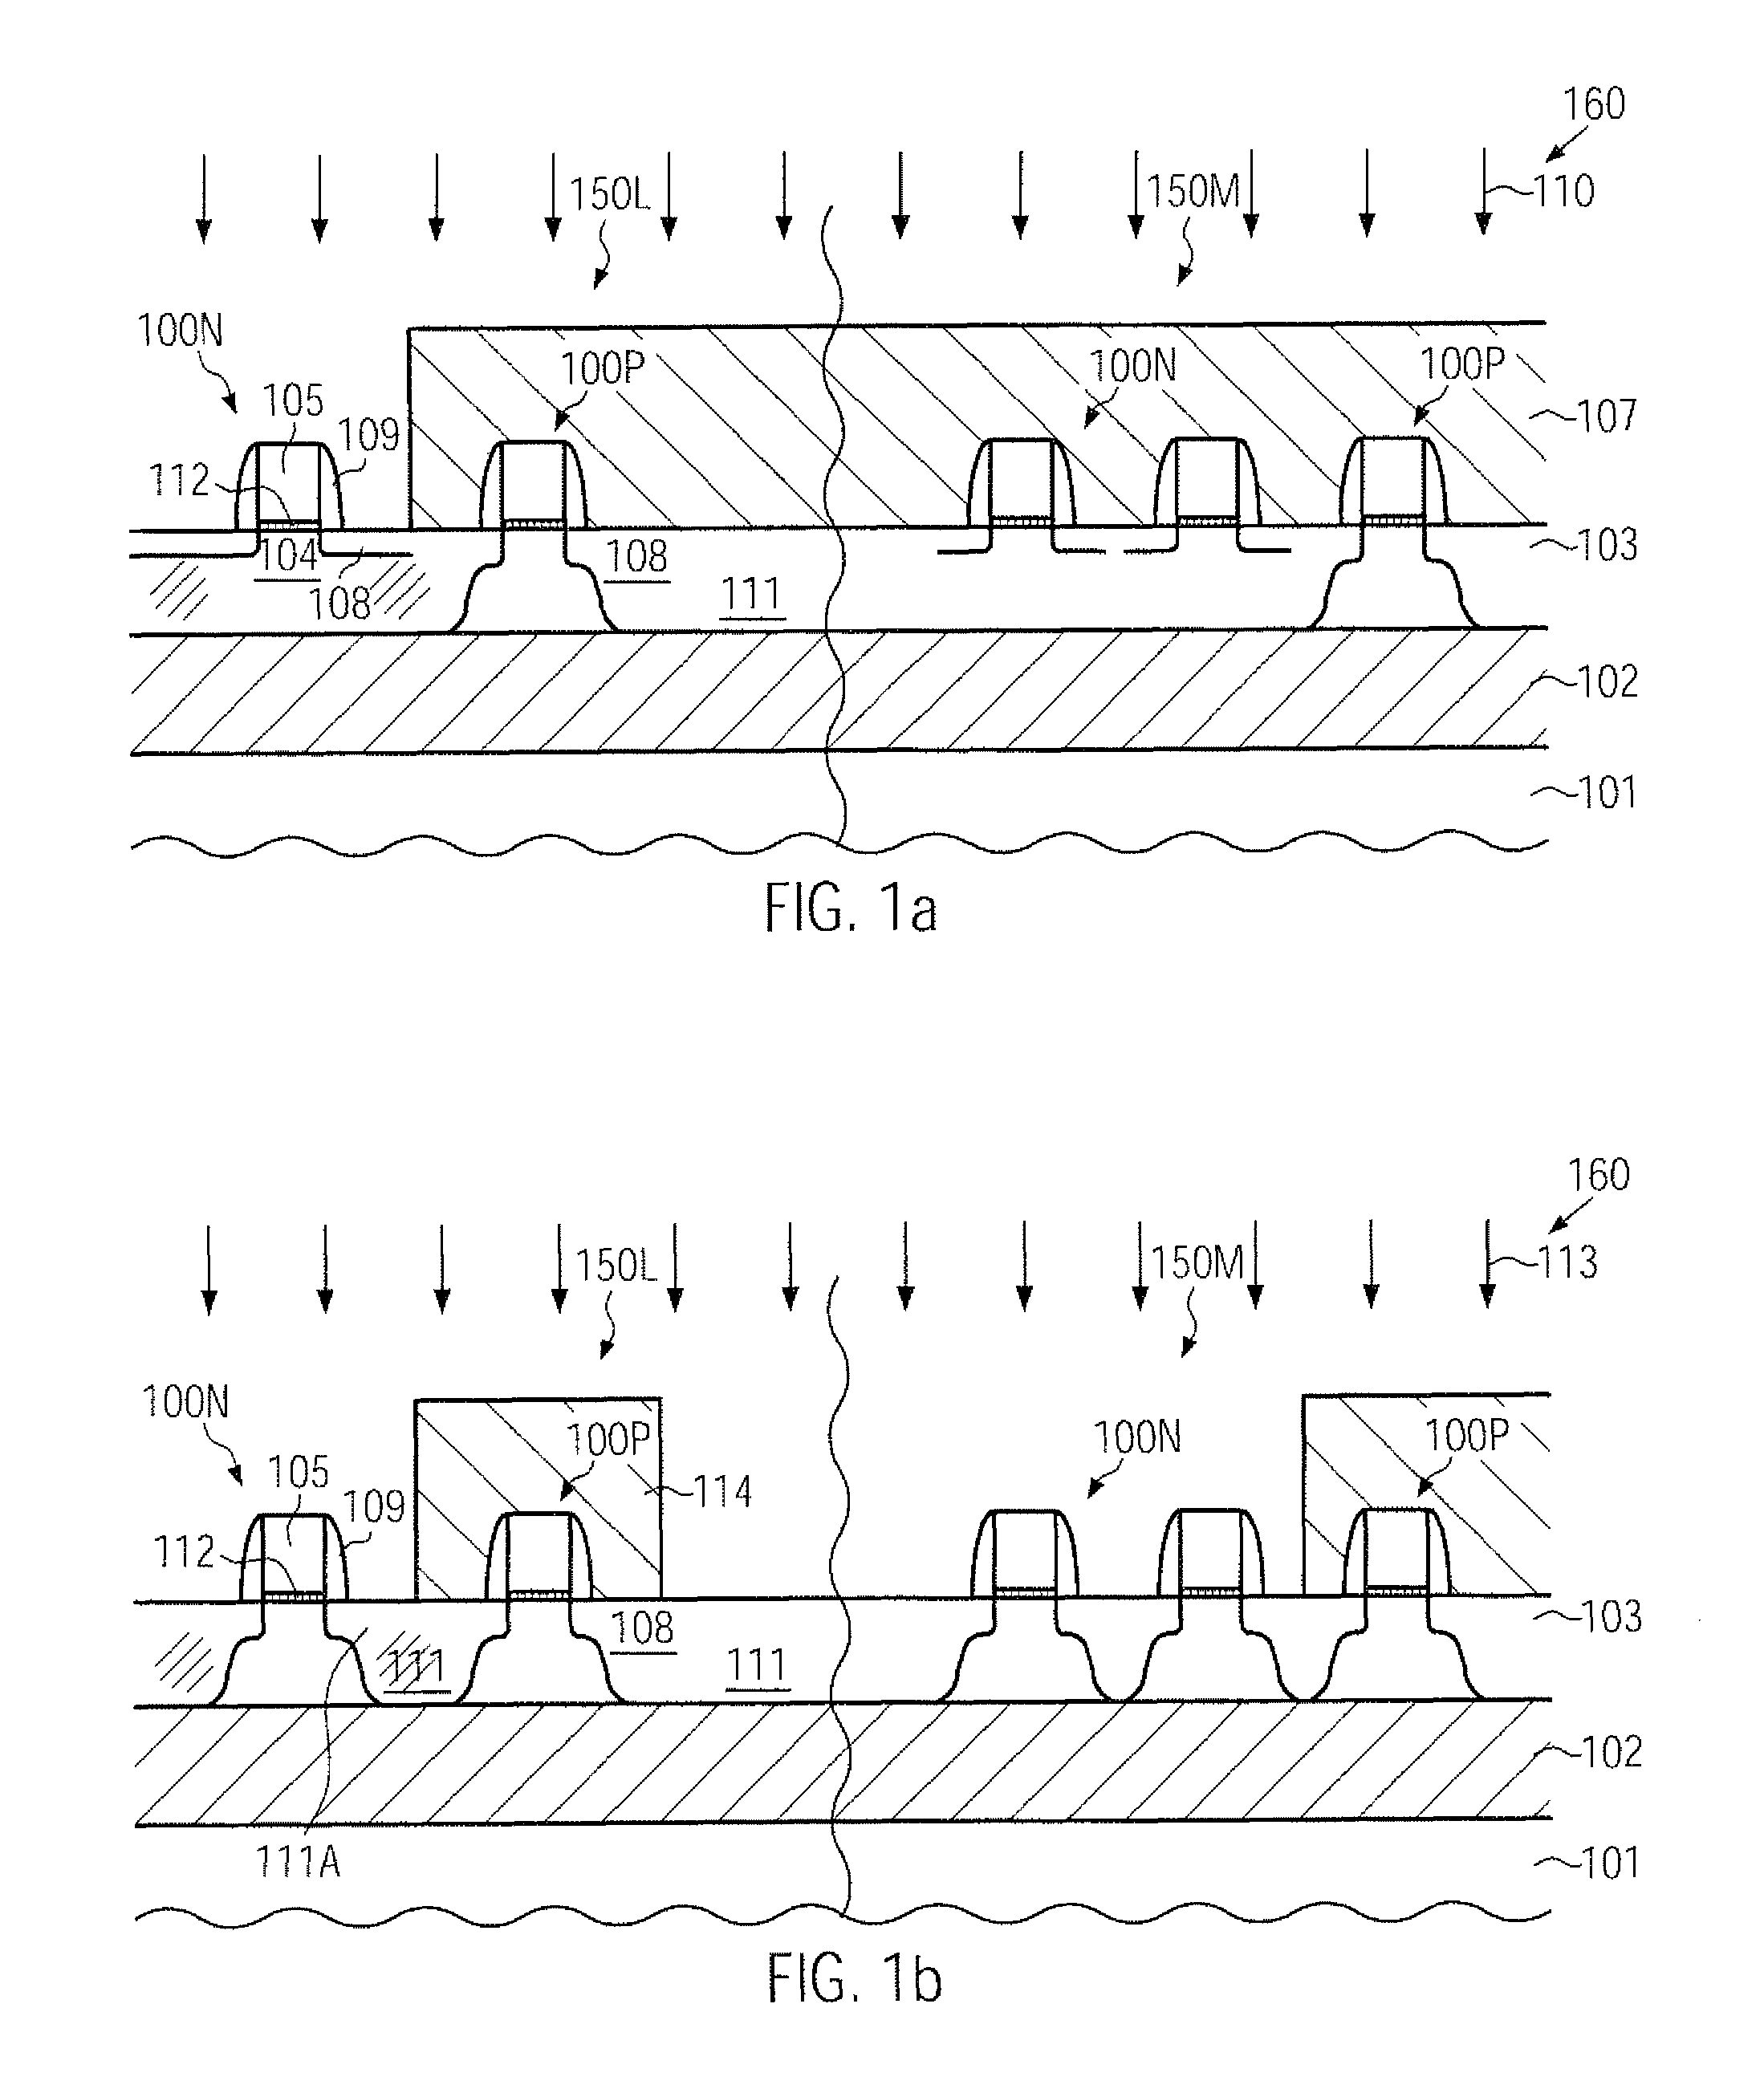 Reduction of memory instability by local adaptation of re-crystallization conditions in a cache area of a semiconductor device